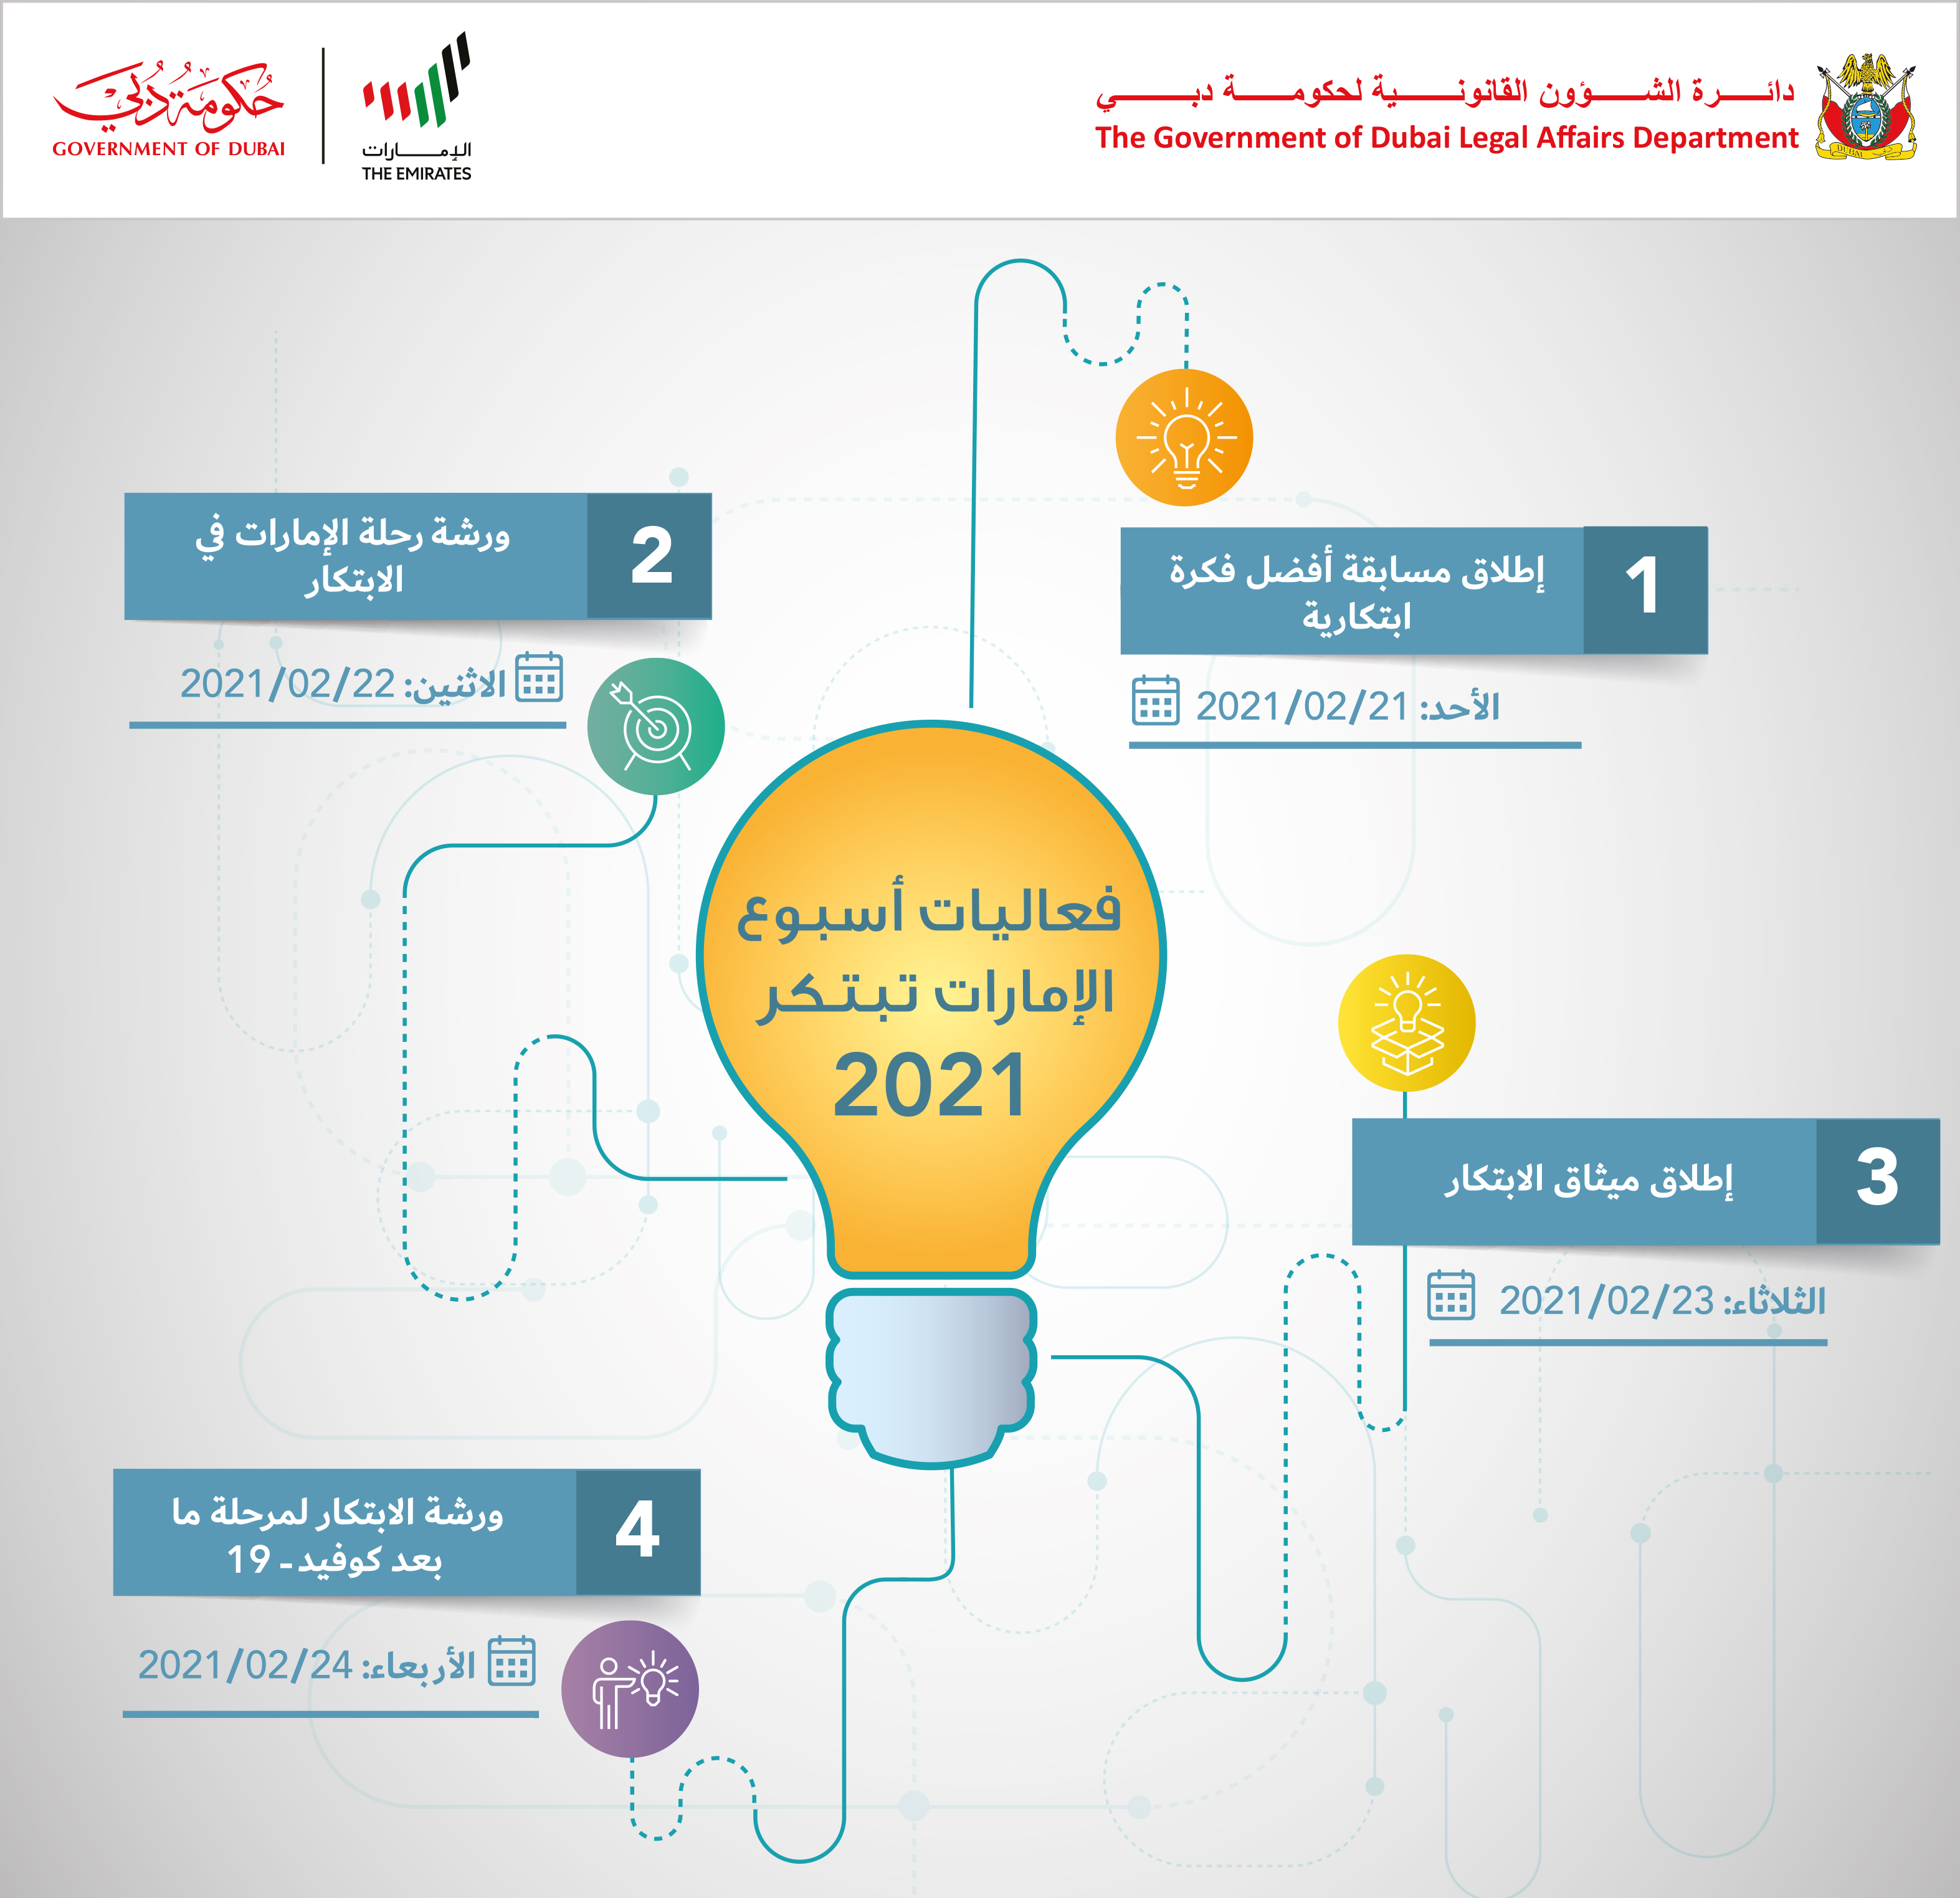 The Government of Dubai Legal Affairs Department Participates in UAE Innovation Week